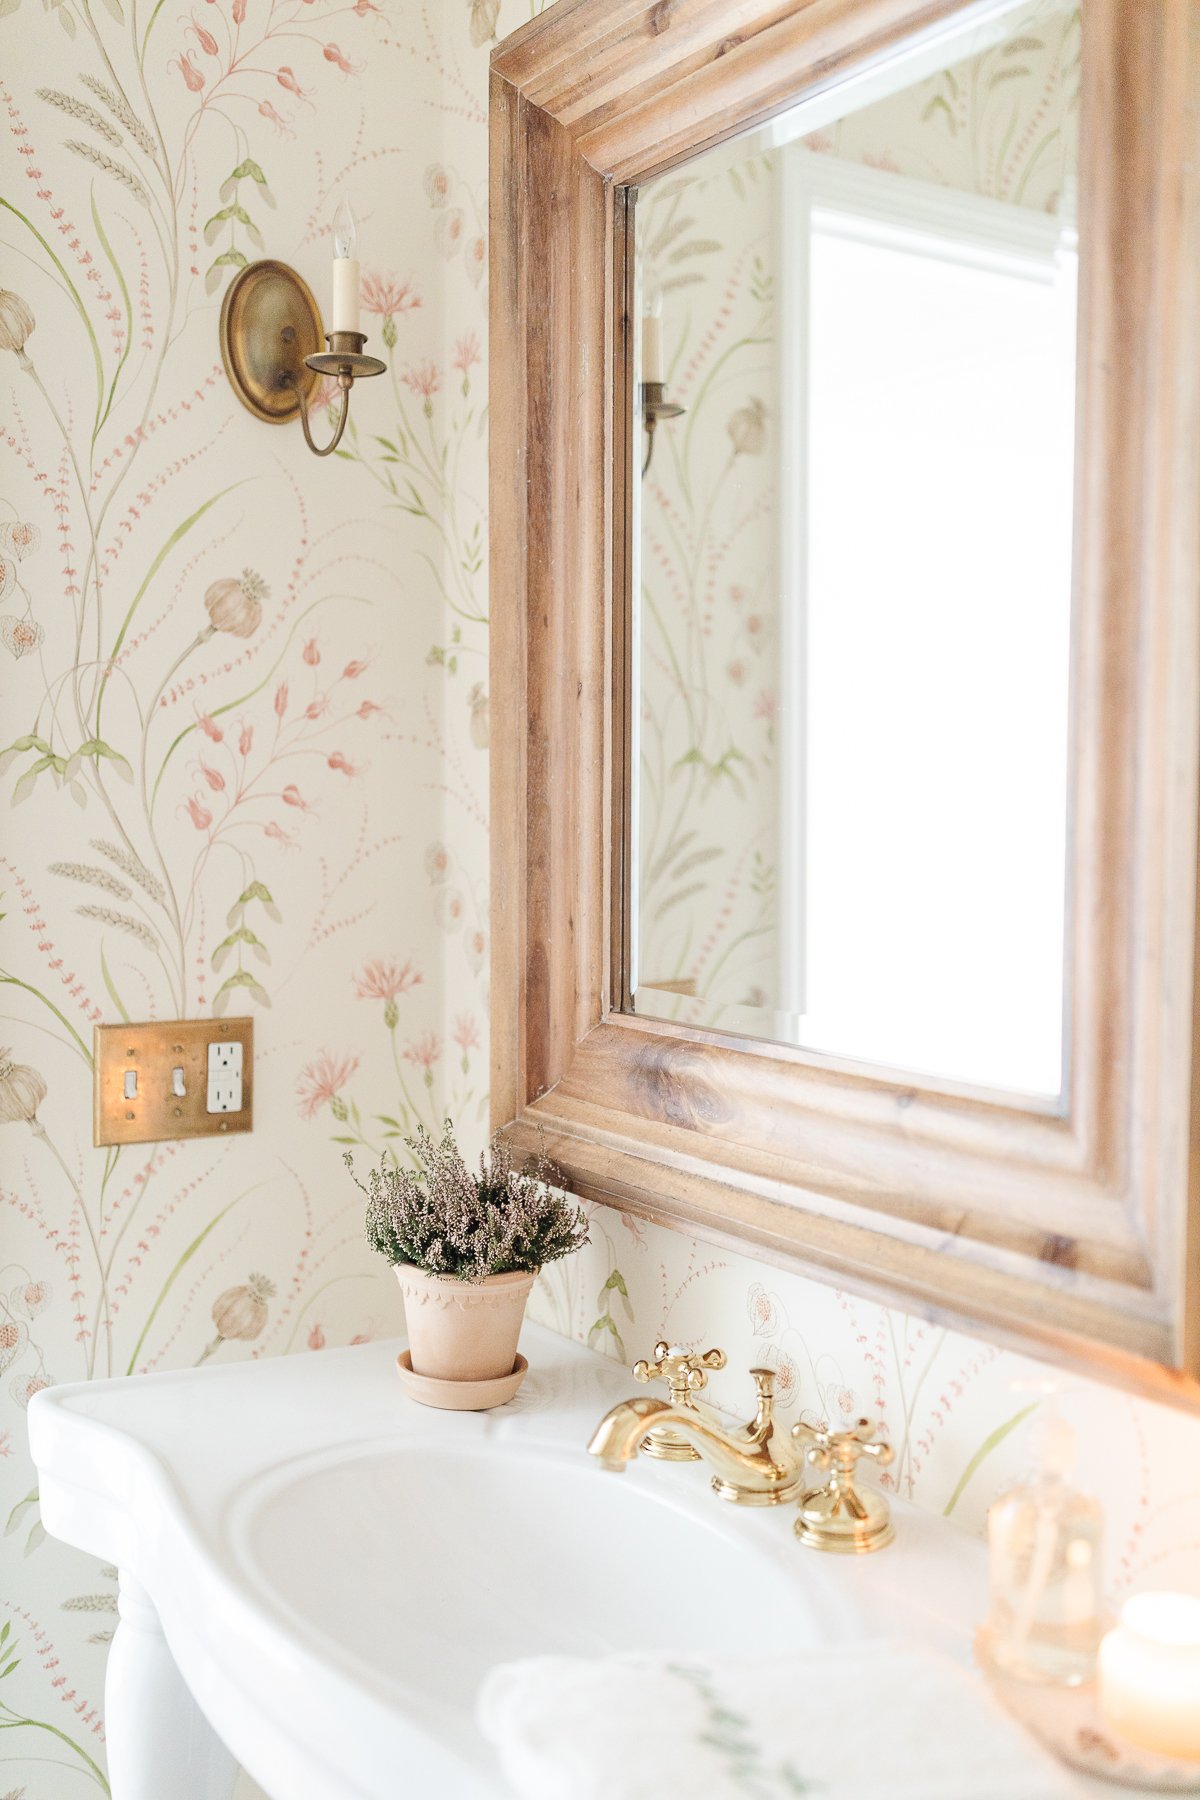 A wallpapered powder room with a wood mirror and white pedestal sink.